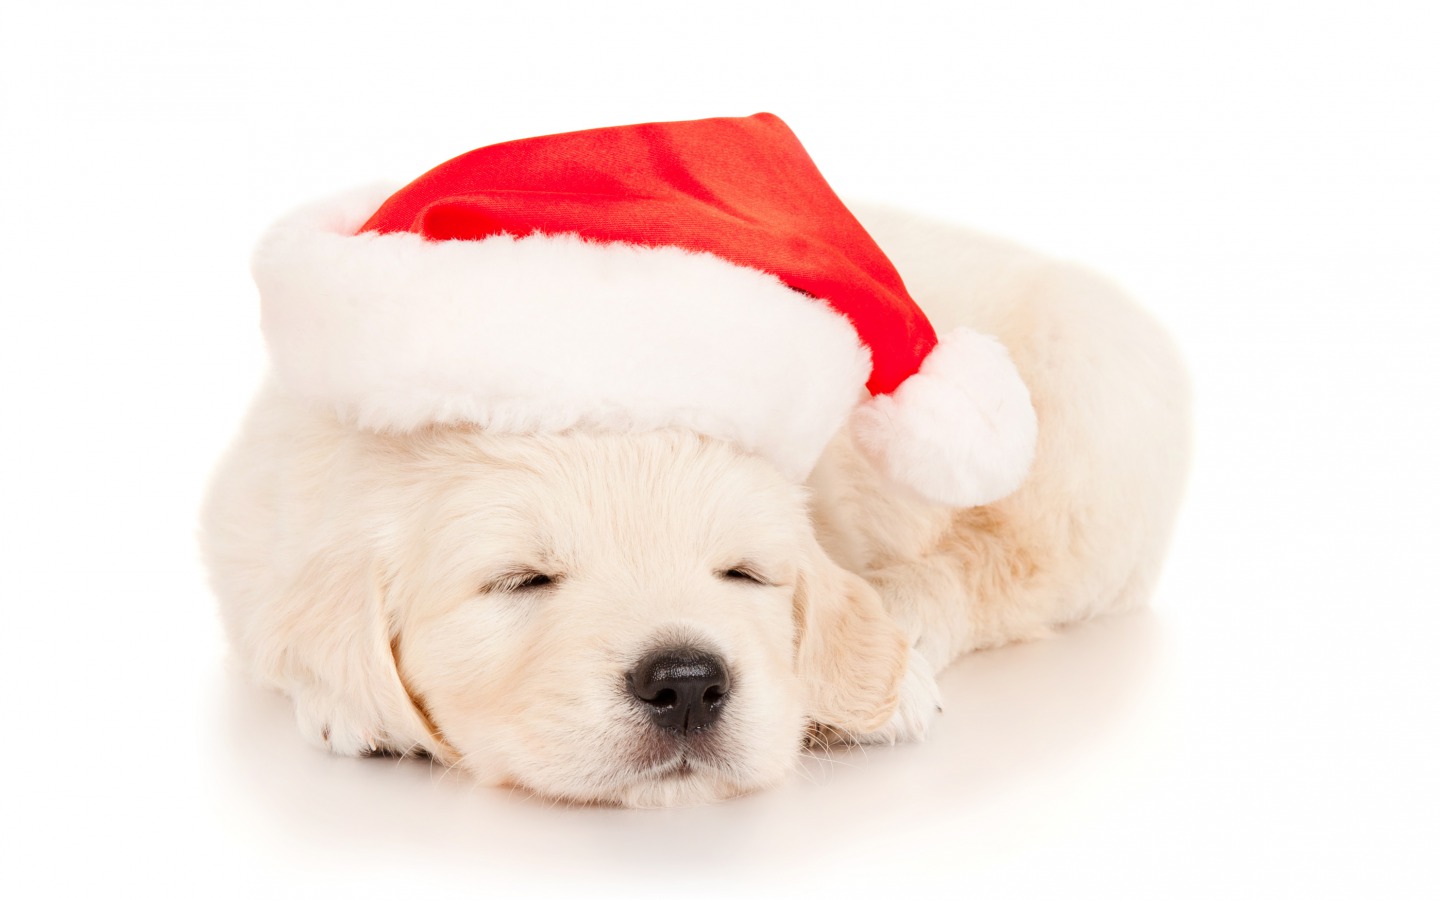 Wishes Gif Wallpaper Cute Christmas Puppy Sleeping